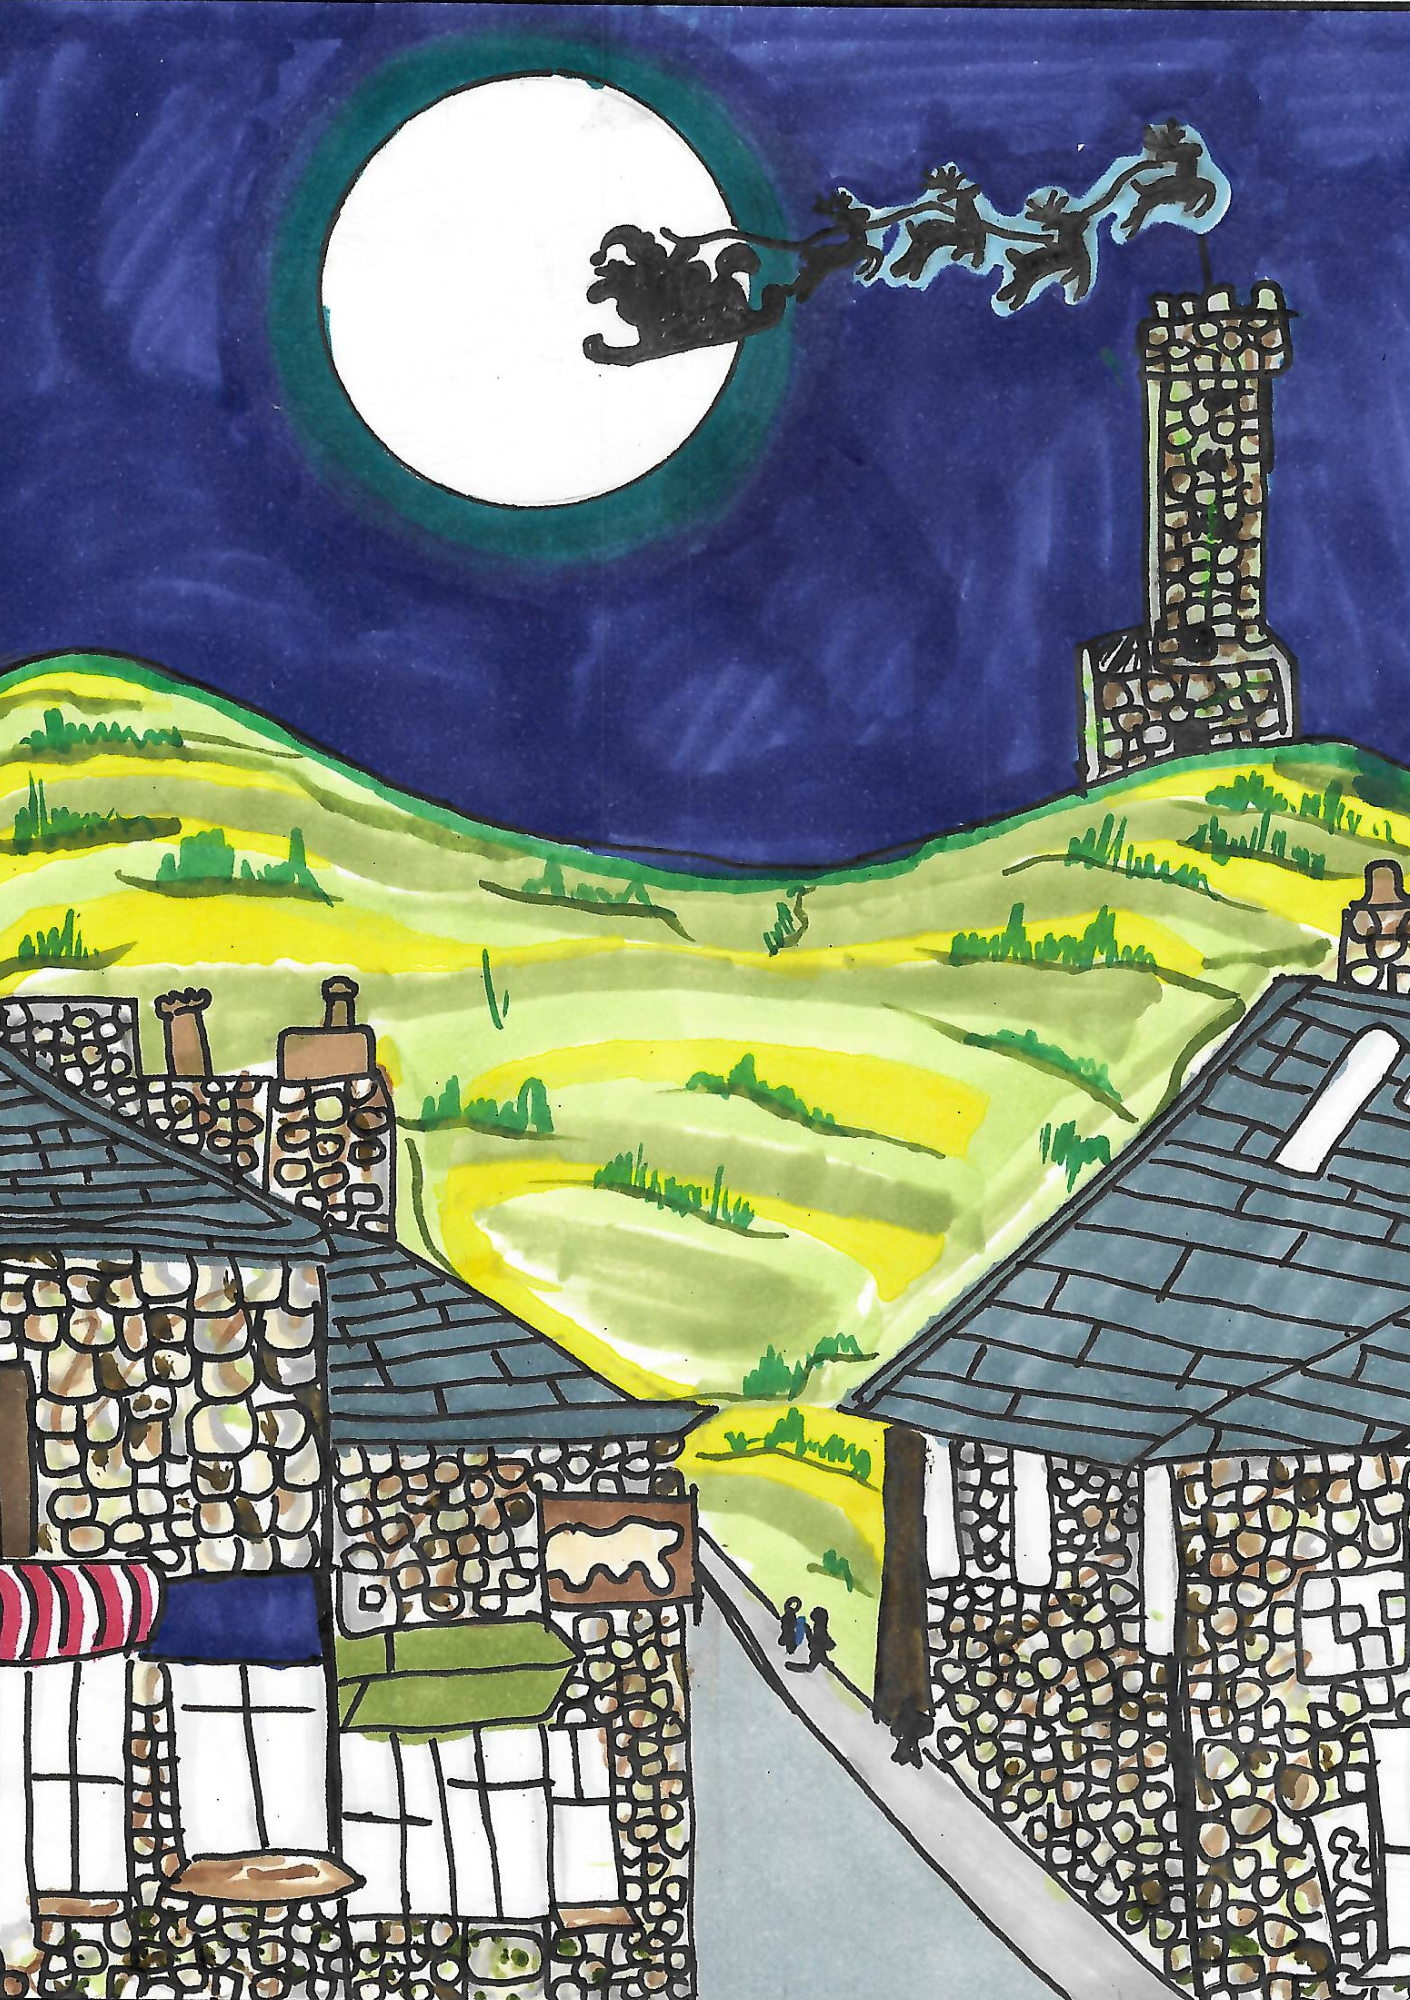 The winner of James Daly's Christmas Card Competition. The image depicts a whimsical night scene in a rustic -Ramsbottom - village. A full moon dominates the night sky, casting a silvery glow over the landscape. Against the moon, the silhouette of Father Christmas and his reindeer. Below, there is Peel tower on a hilltop, part of the rural setting. The foreground shows the roofs and chimneys of stone cottages with a clear attention to the textures of the building materials. Two small figures appear to be walking along a village road, hinting at life in this quaint setting. The scene is reminiscent of classic storybook illustrations, evoking a sense of magic and folklore.